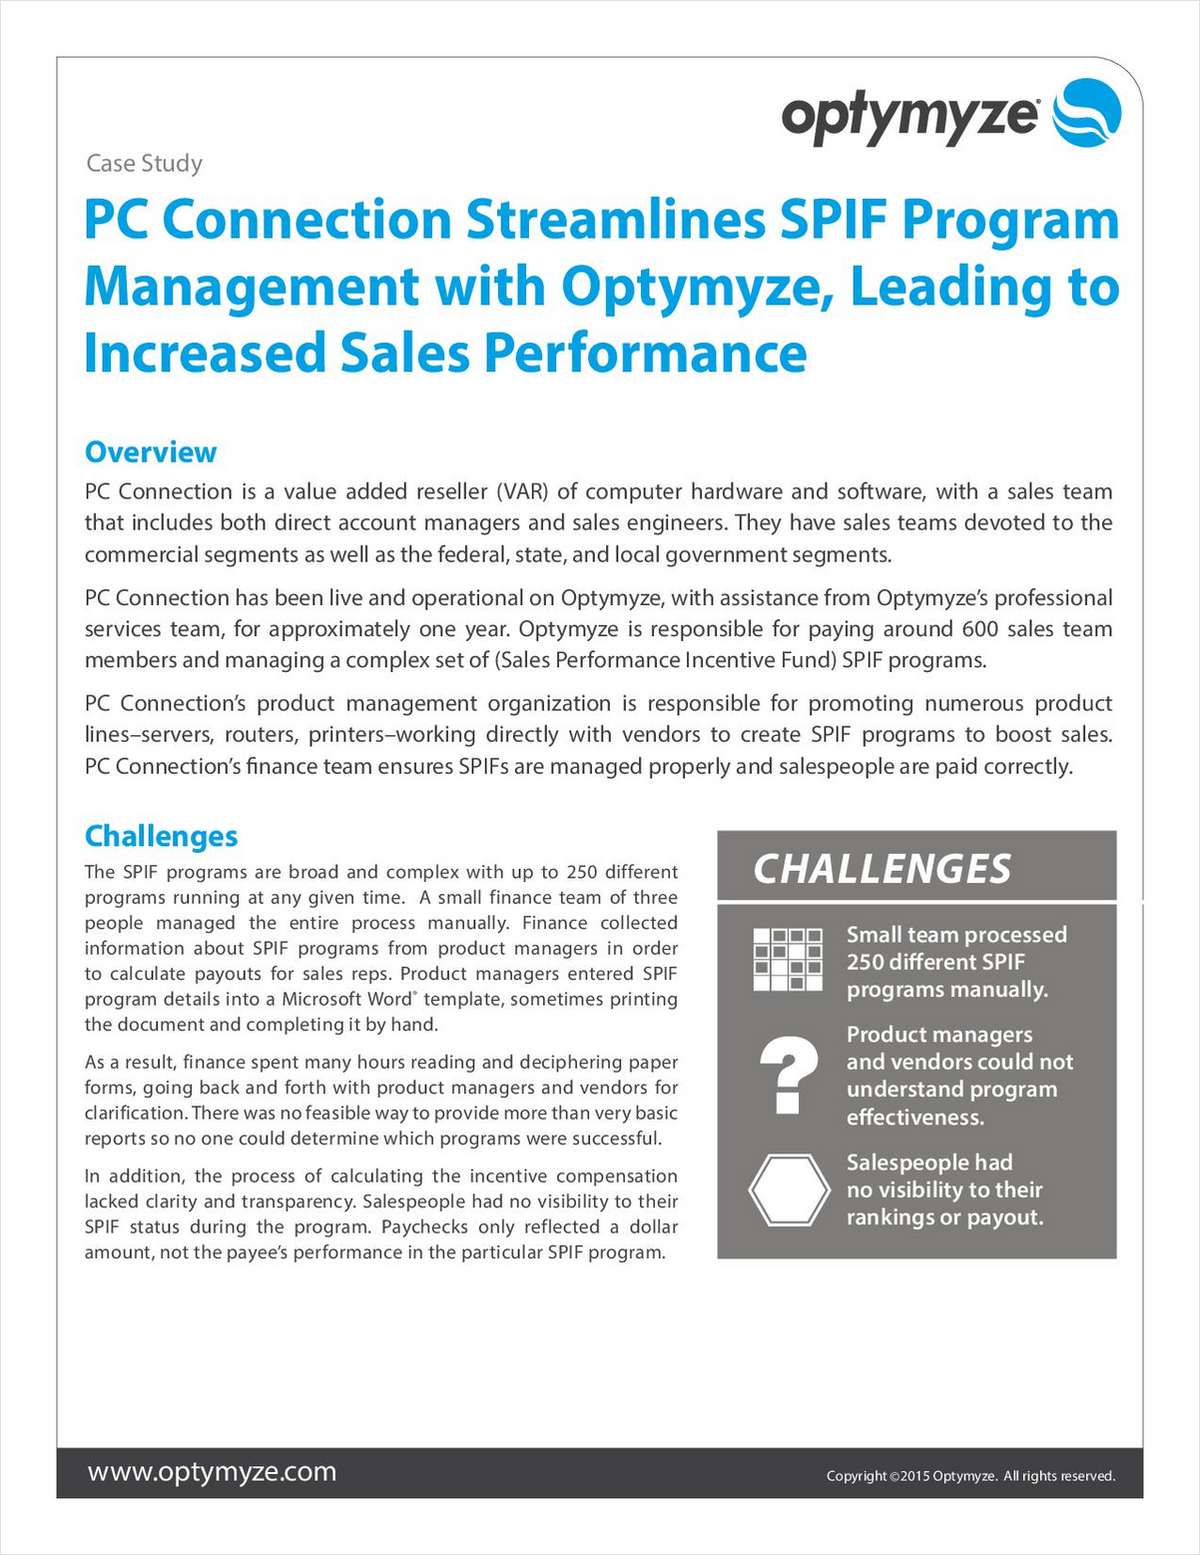 PC Connection Streamlines SPIF Program Management with Optymyze, Leading to Increased Sales Performance